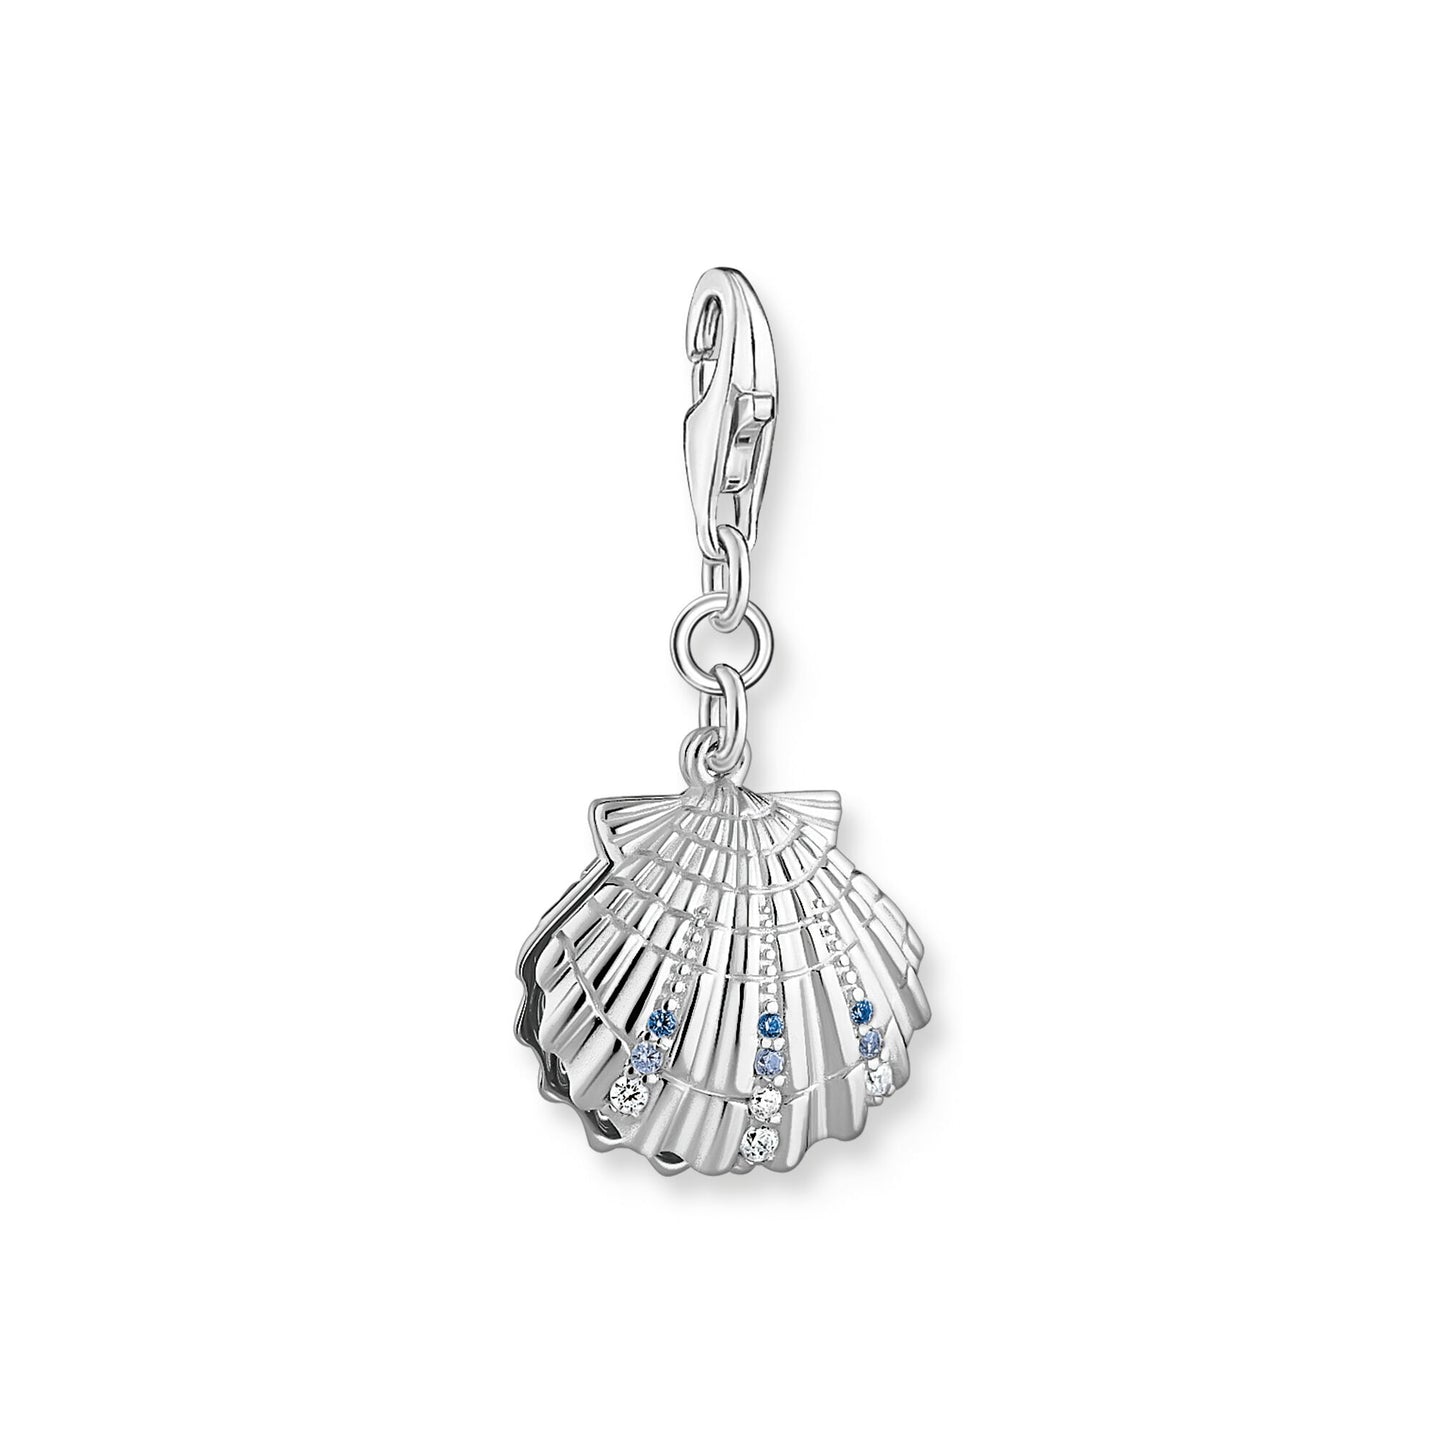 CHARM CLUB STERLING SILVER FRESHWATER PEARL IN SHELL CHARM